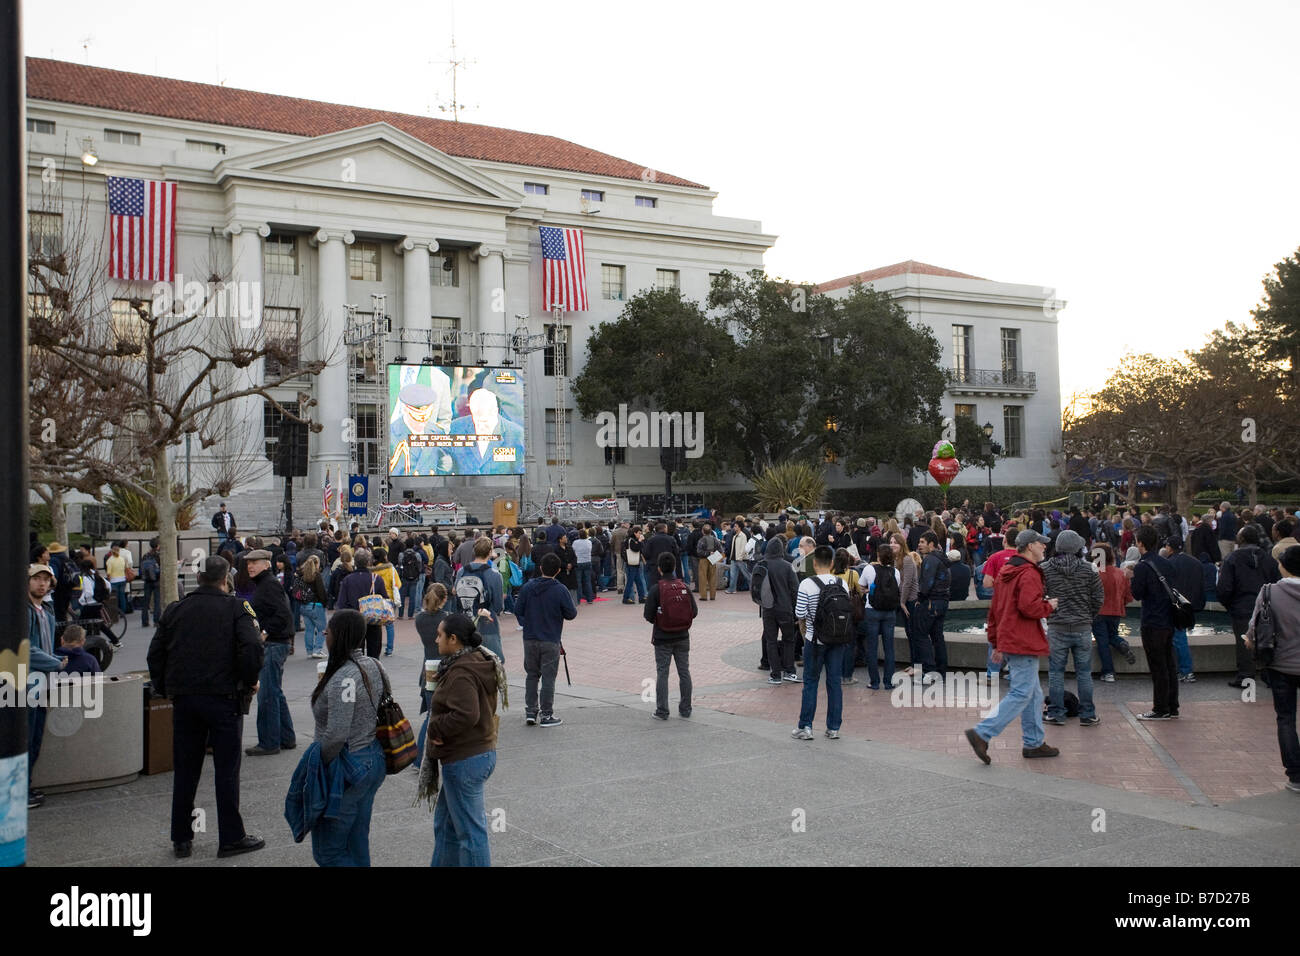 The inaugural watching crowd in front of the Sproul Hall Jumbotron at the University of California at Berkeley. Stock Photo